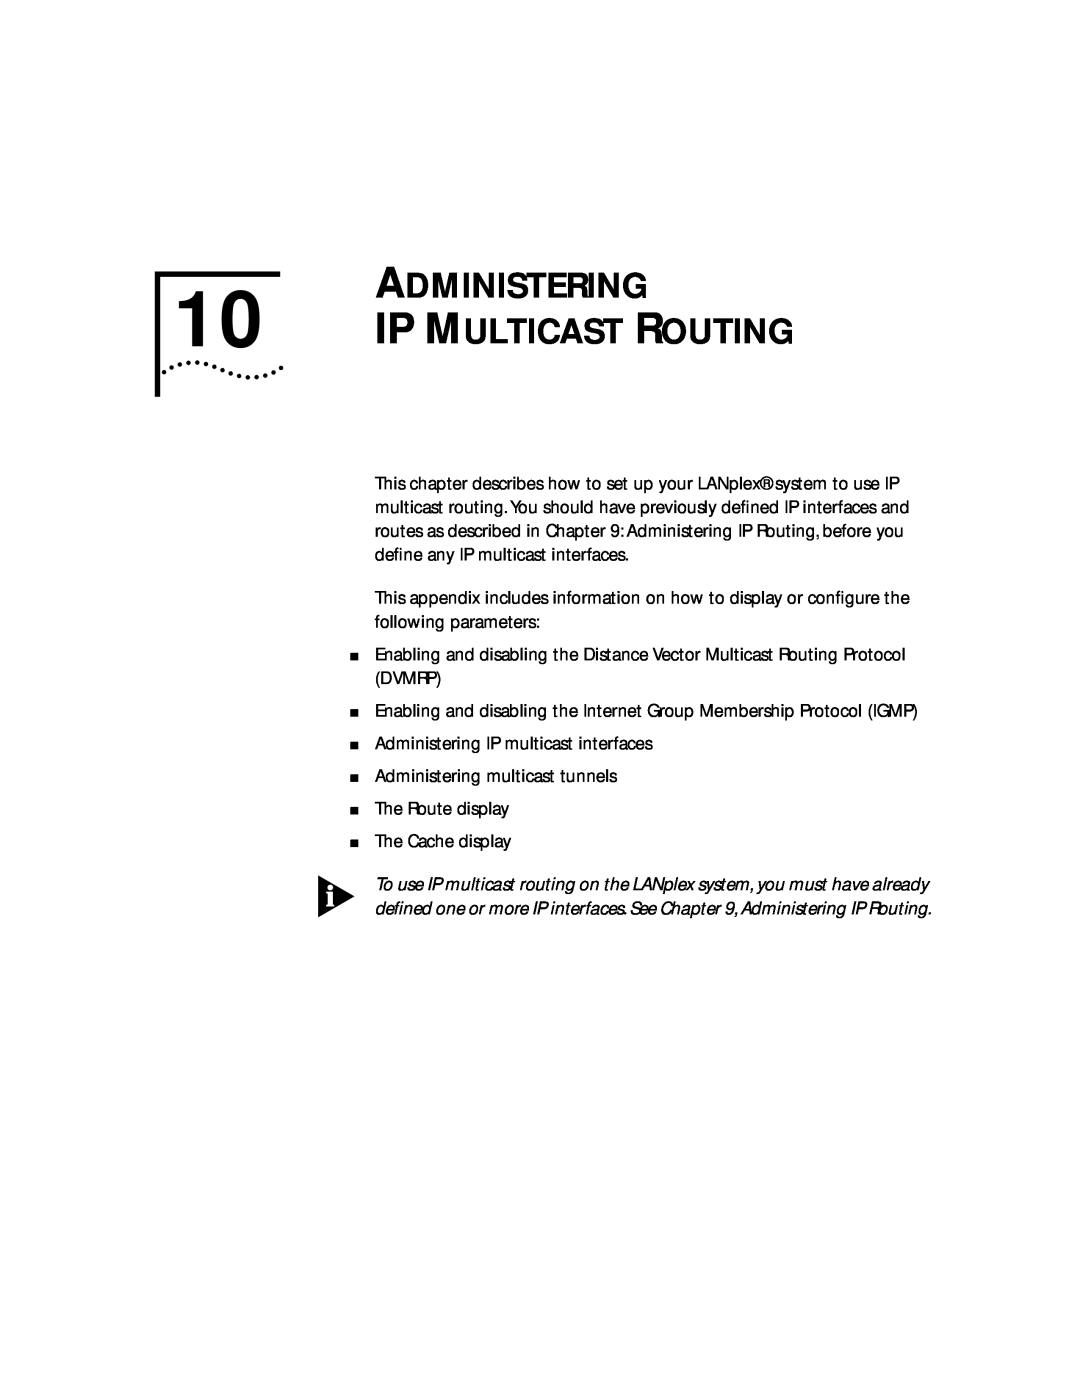 3Com 2500 manual Administering, Ip Multicast Routing 